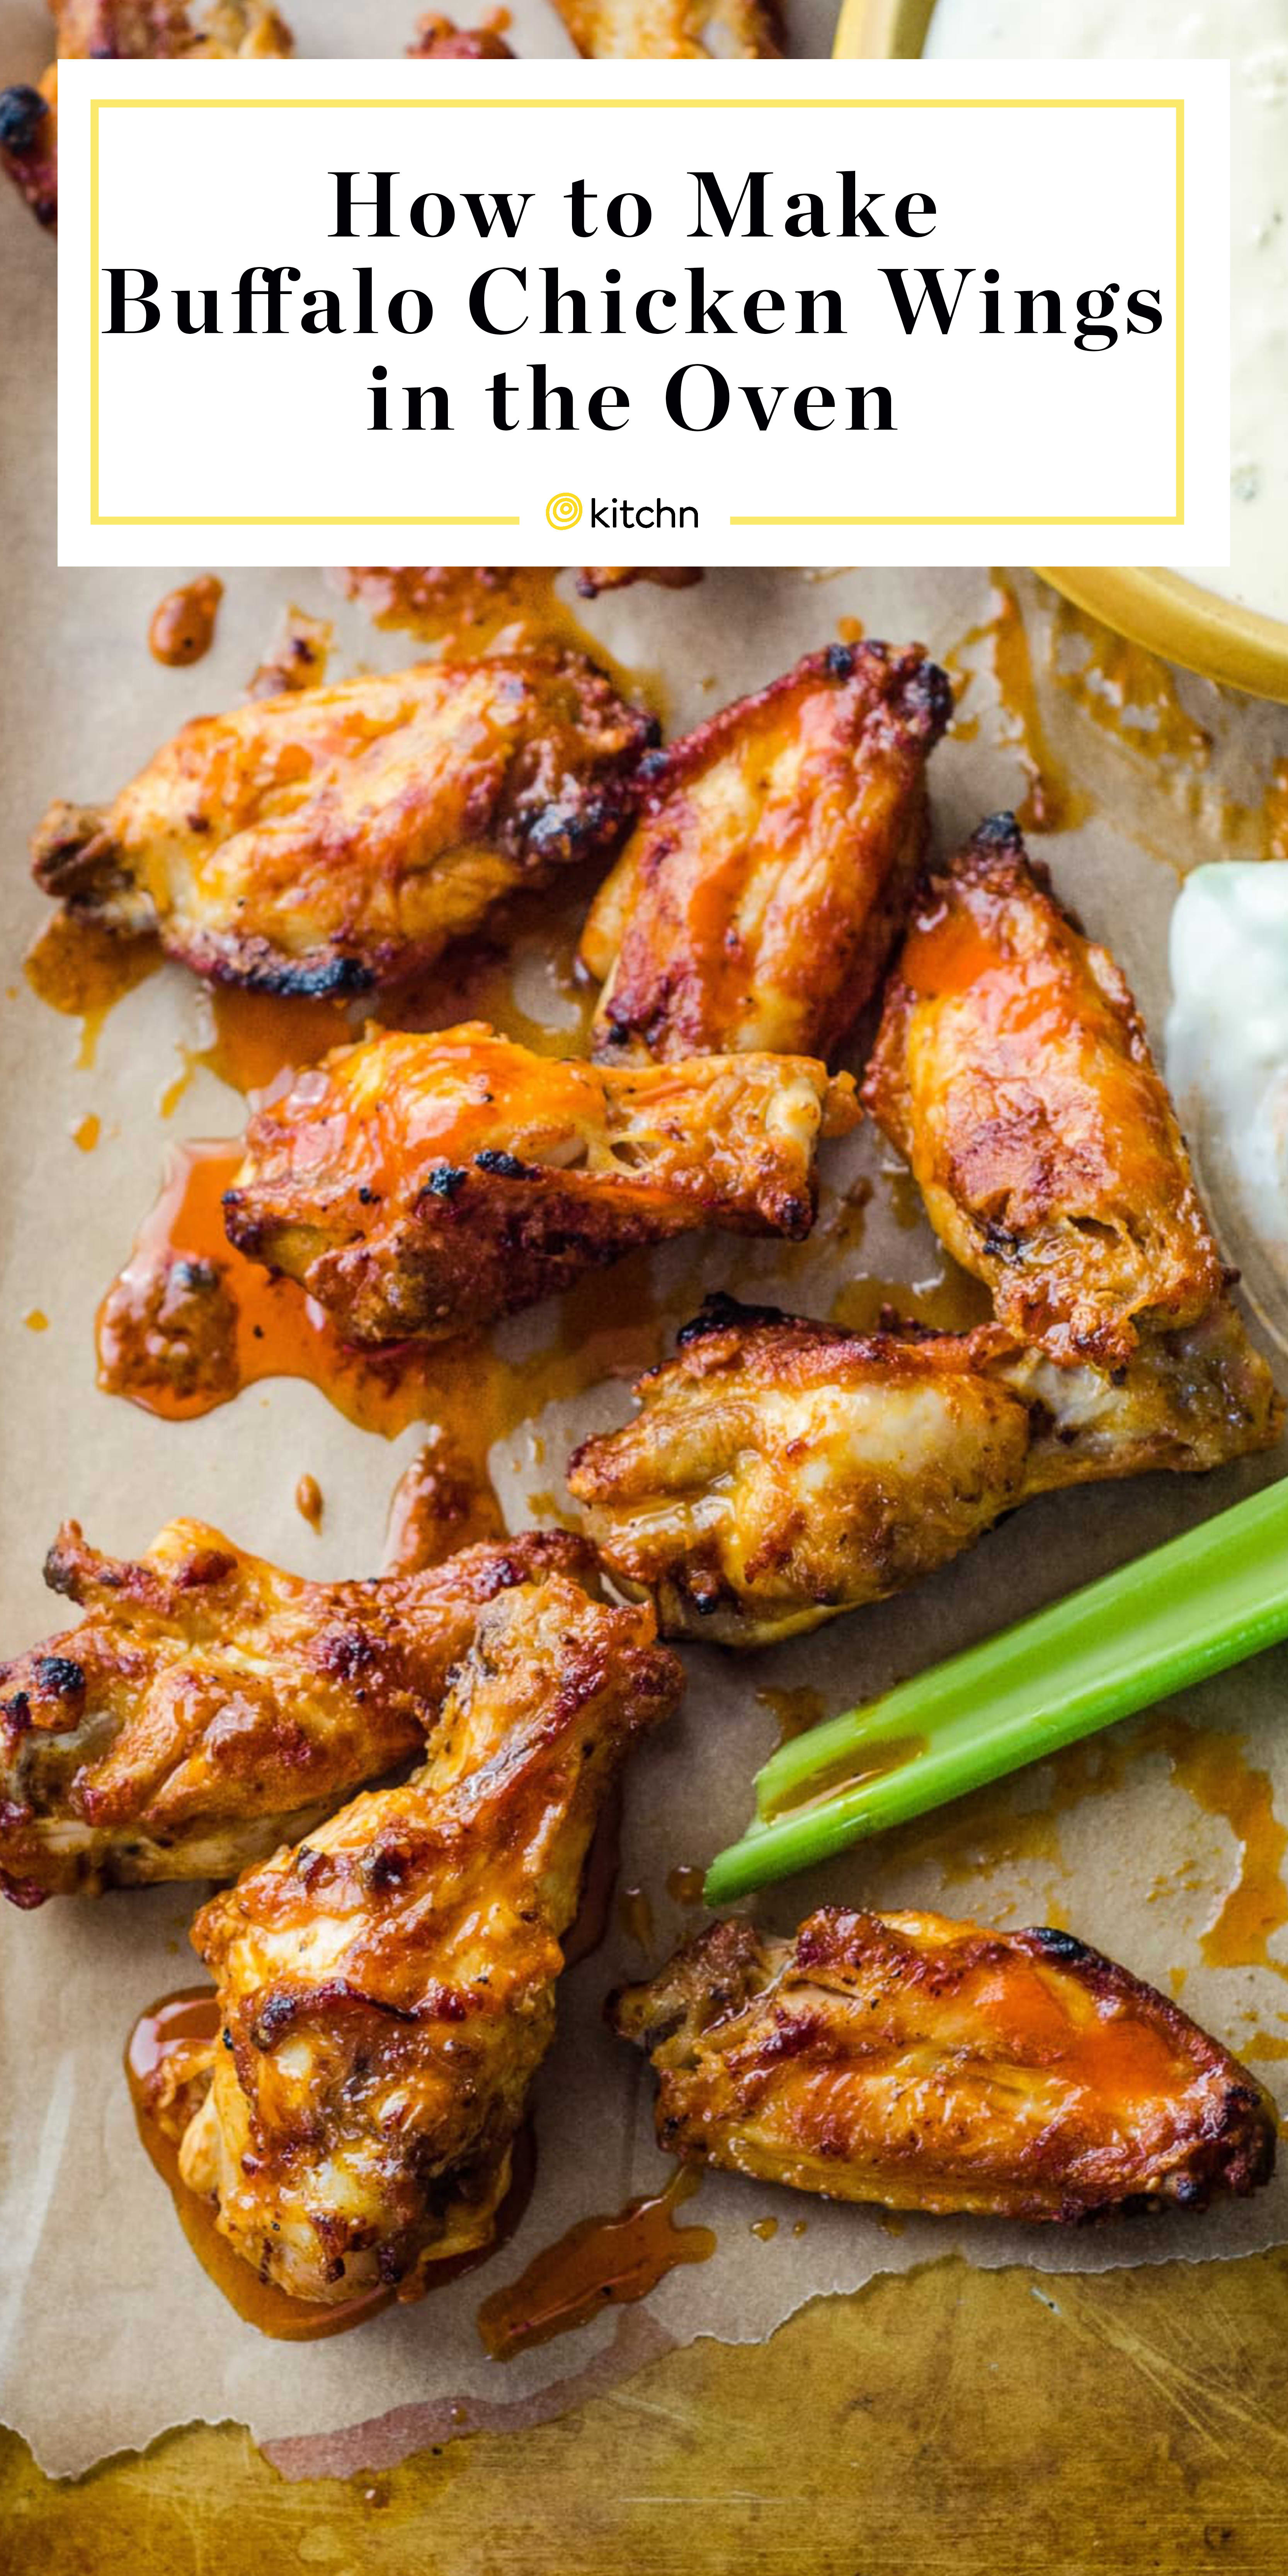 Ray hestekræfter gyde How To Make Buffalo Chicken Wings in the Oven | Kitchn